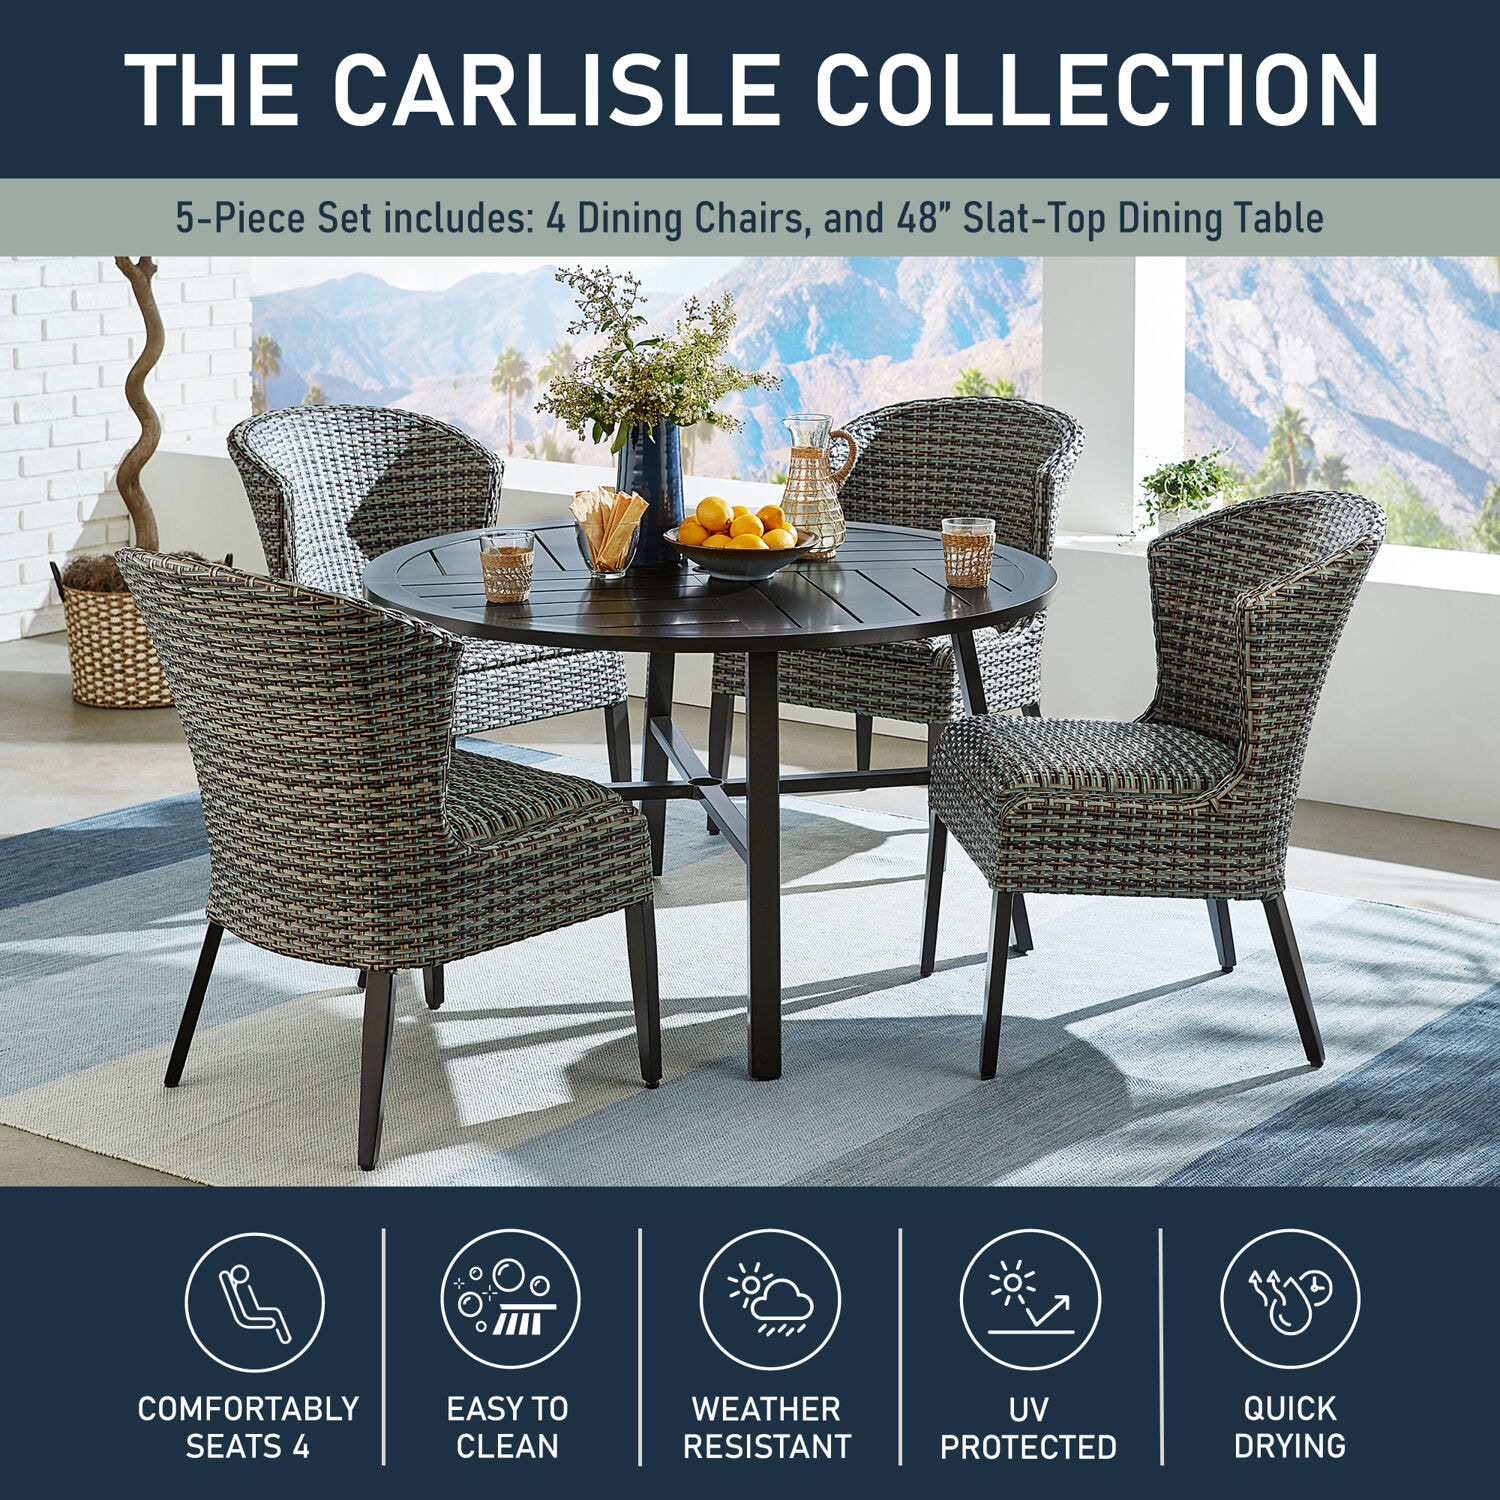 Agio Patio Dining Sets at